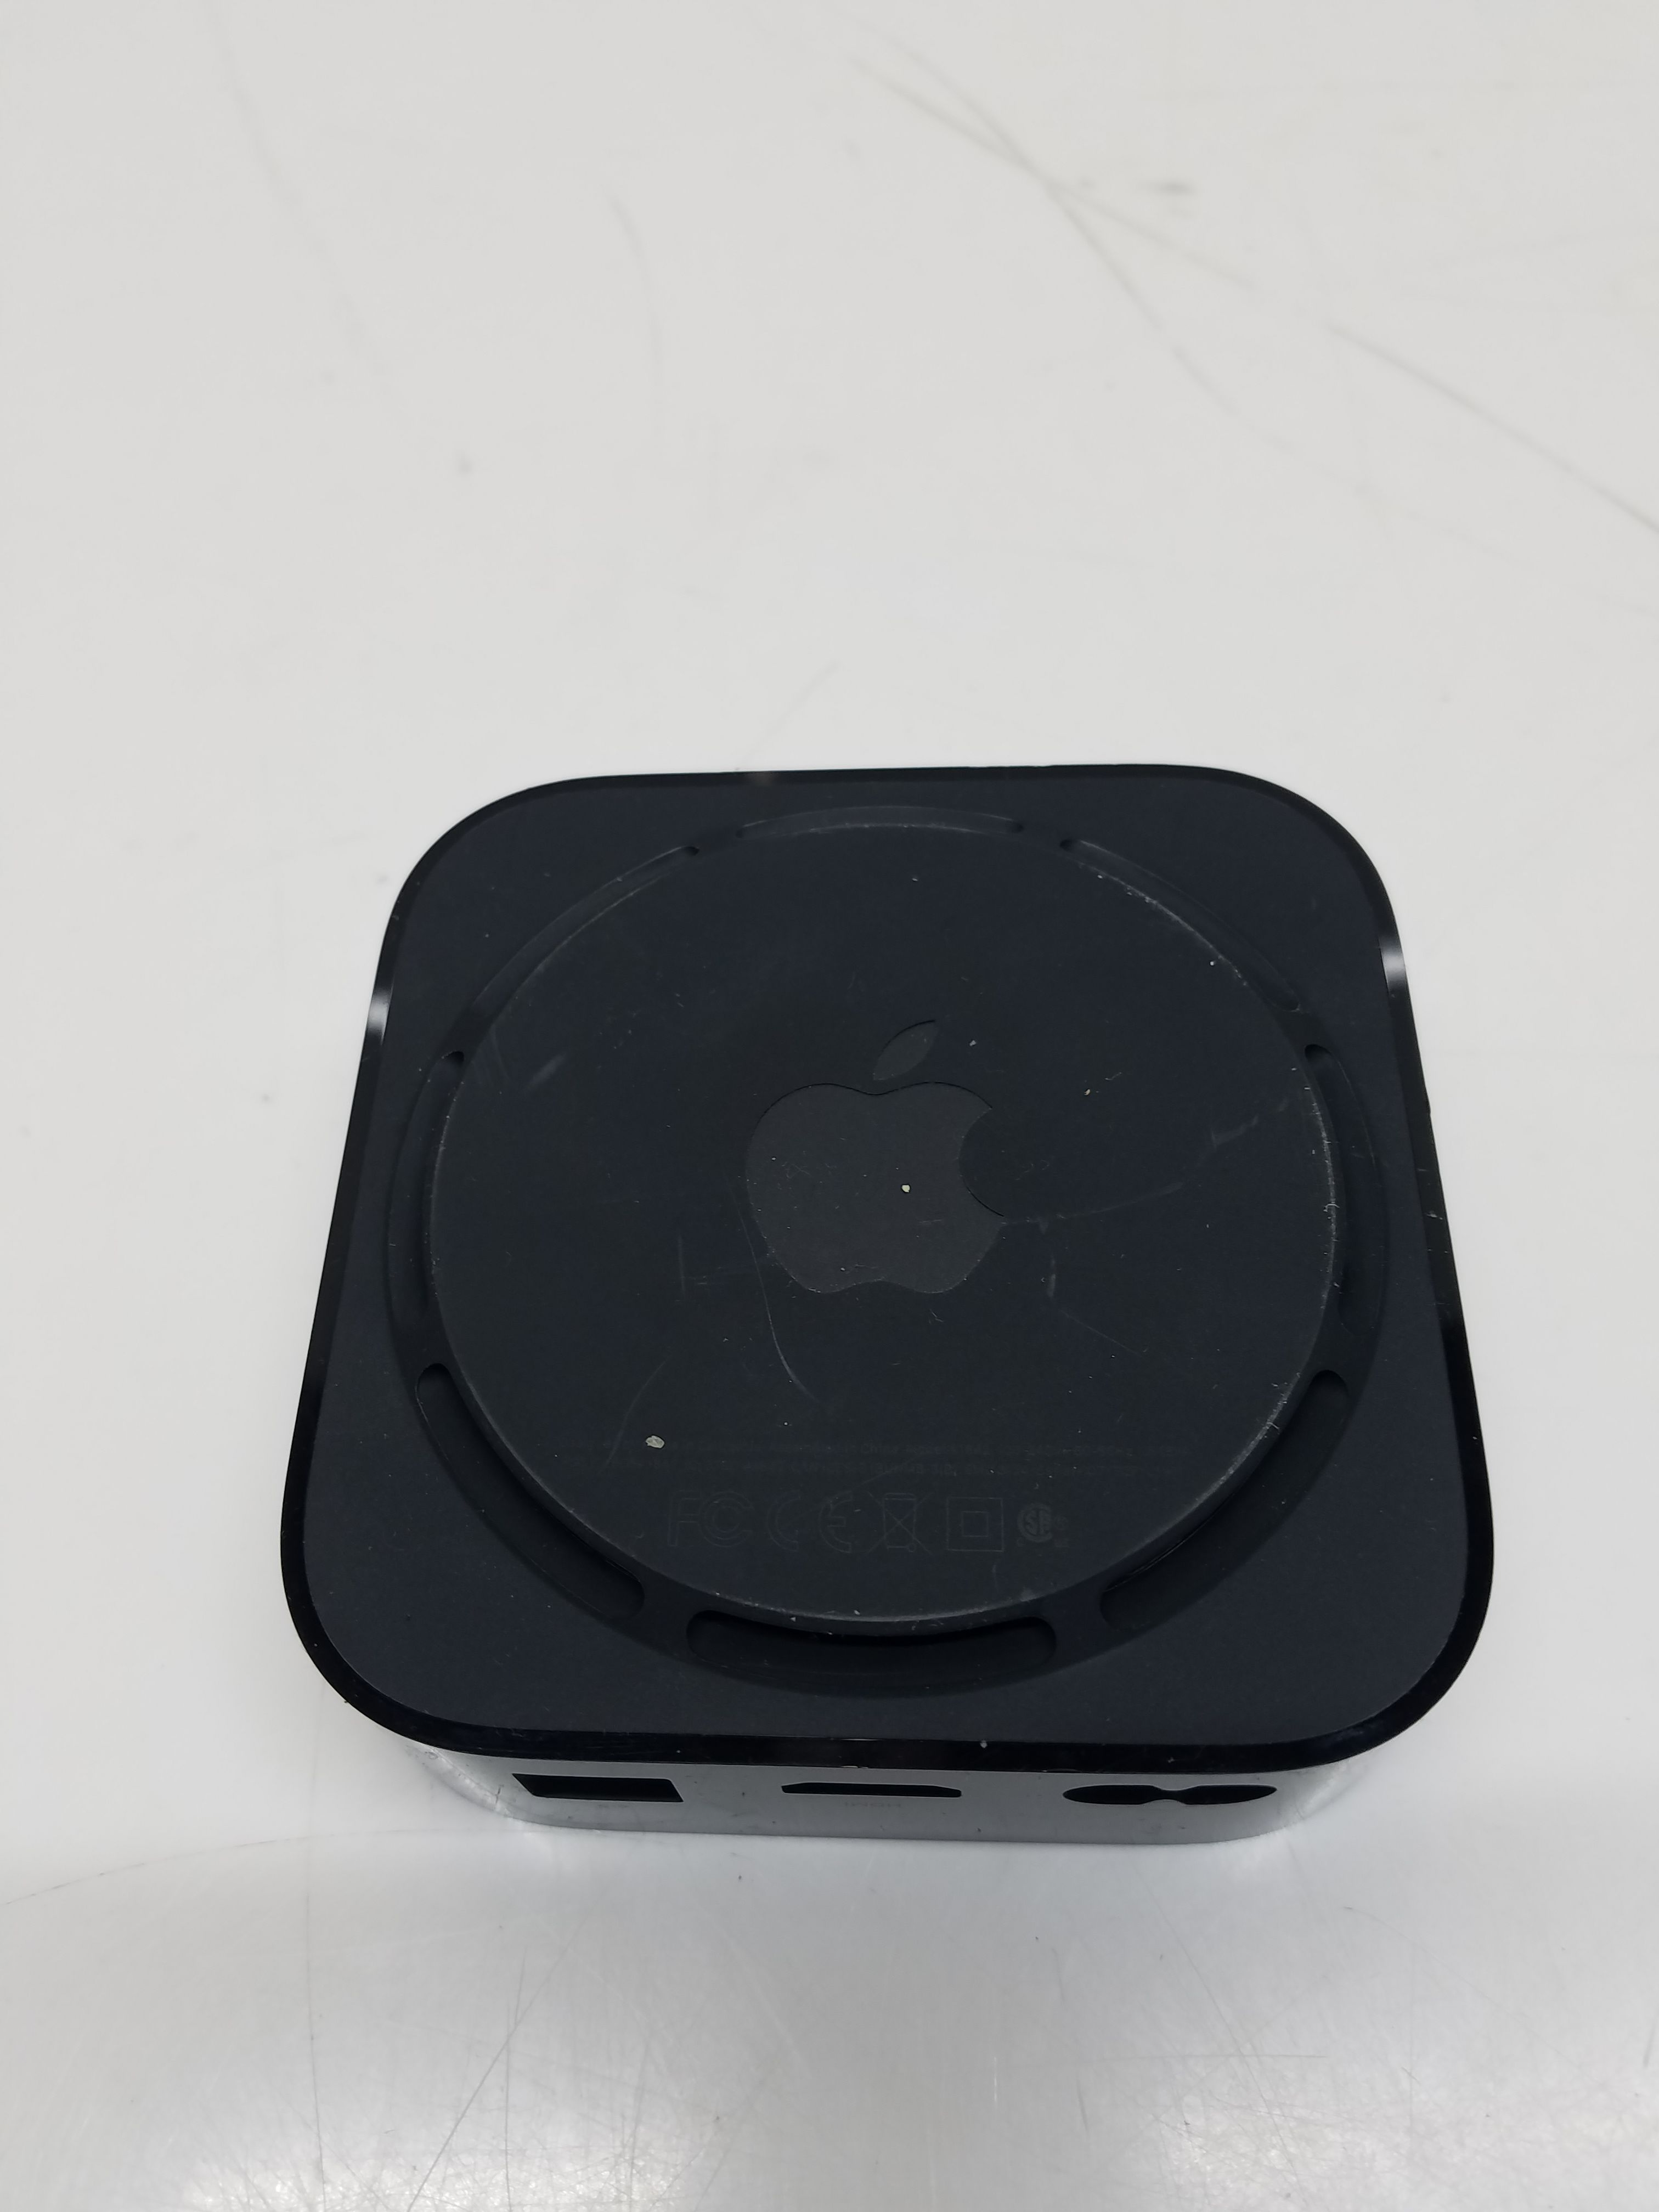 Buy Apple TV 4K (2017) Model A1842 Storage 32GB for USD 55.00 |  GoodwillFinds